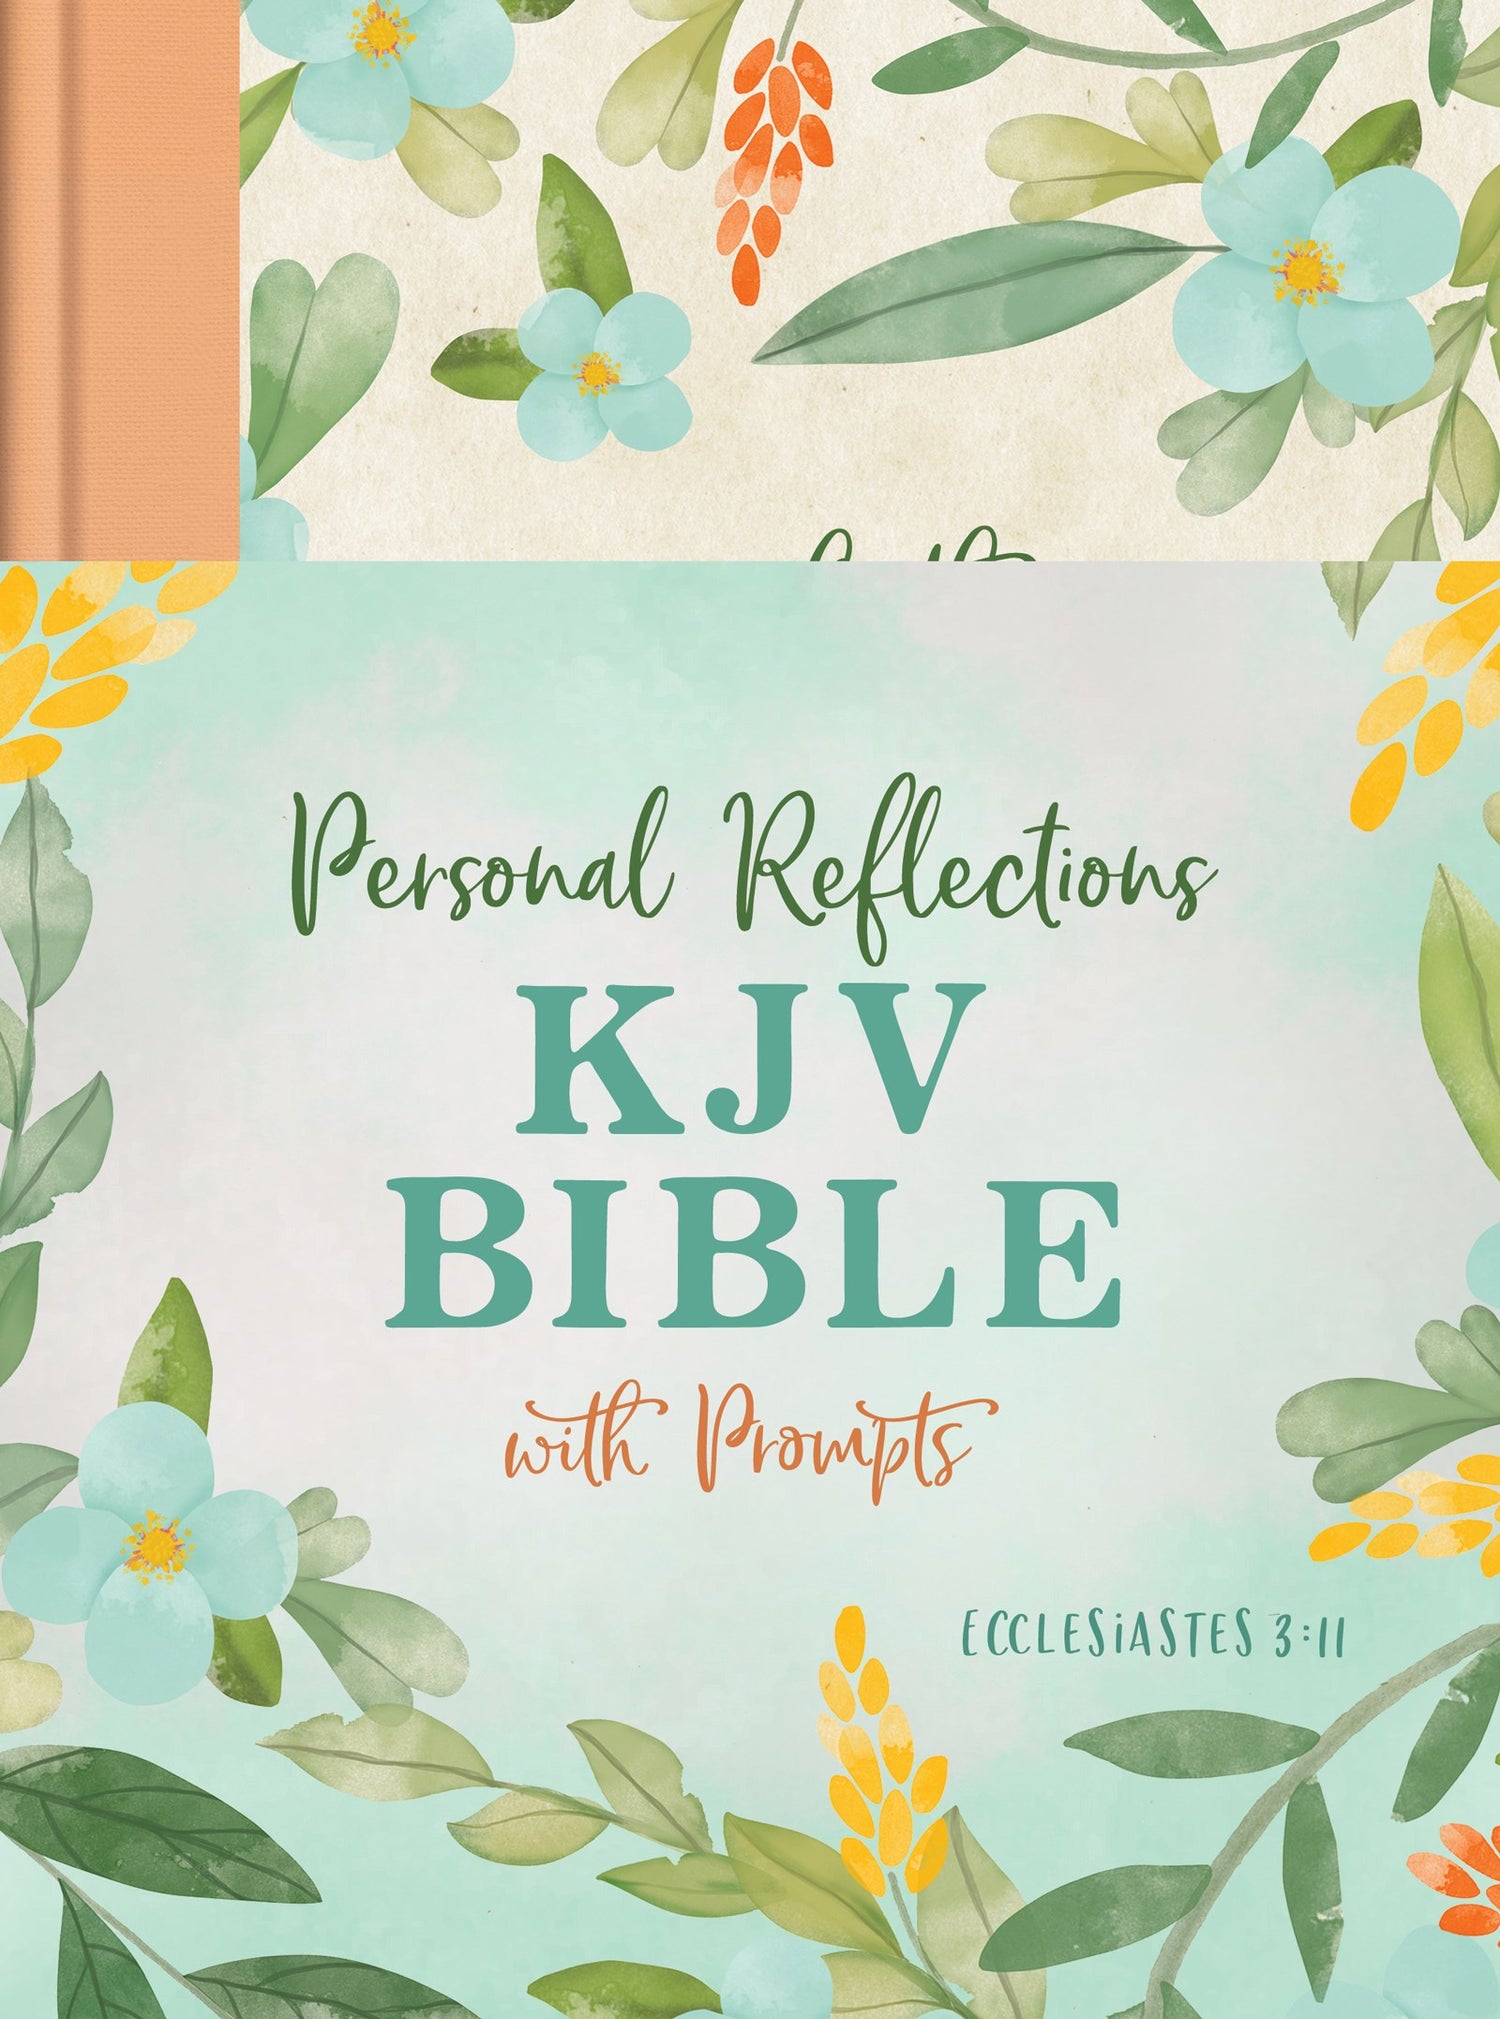 Seed of Abraham Christian Bookstore - (In)Courage - KJV Personal Reflections Bible with Prompts (Ecclesiastes 3:11)-Peach Floral Hardcover